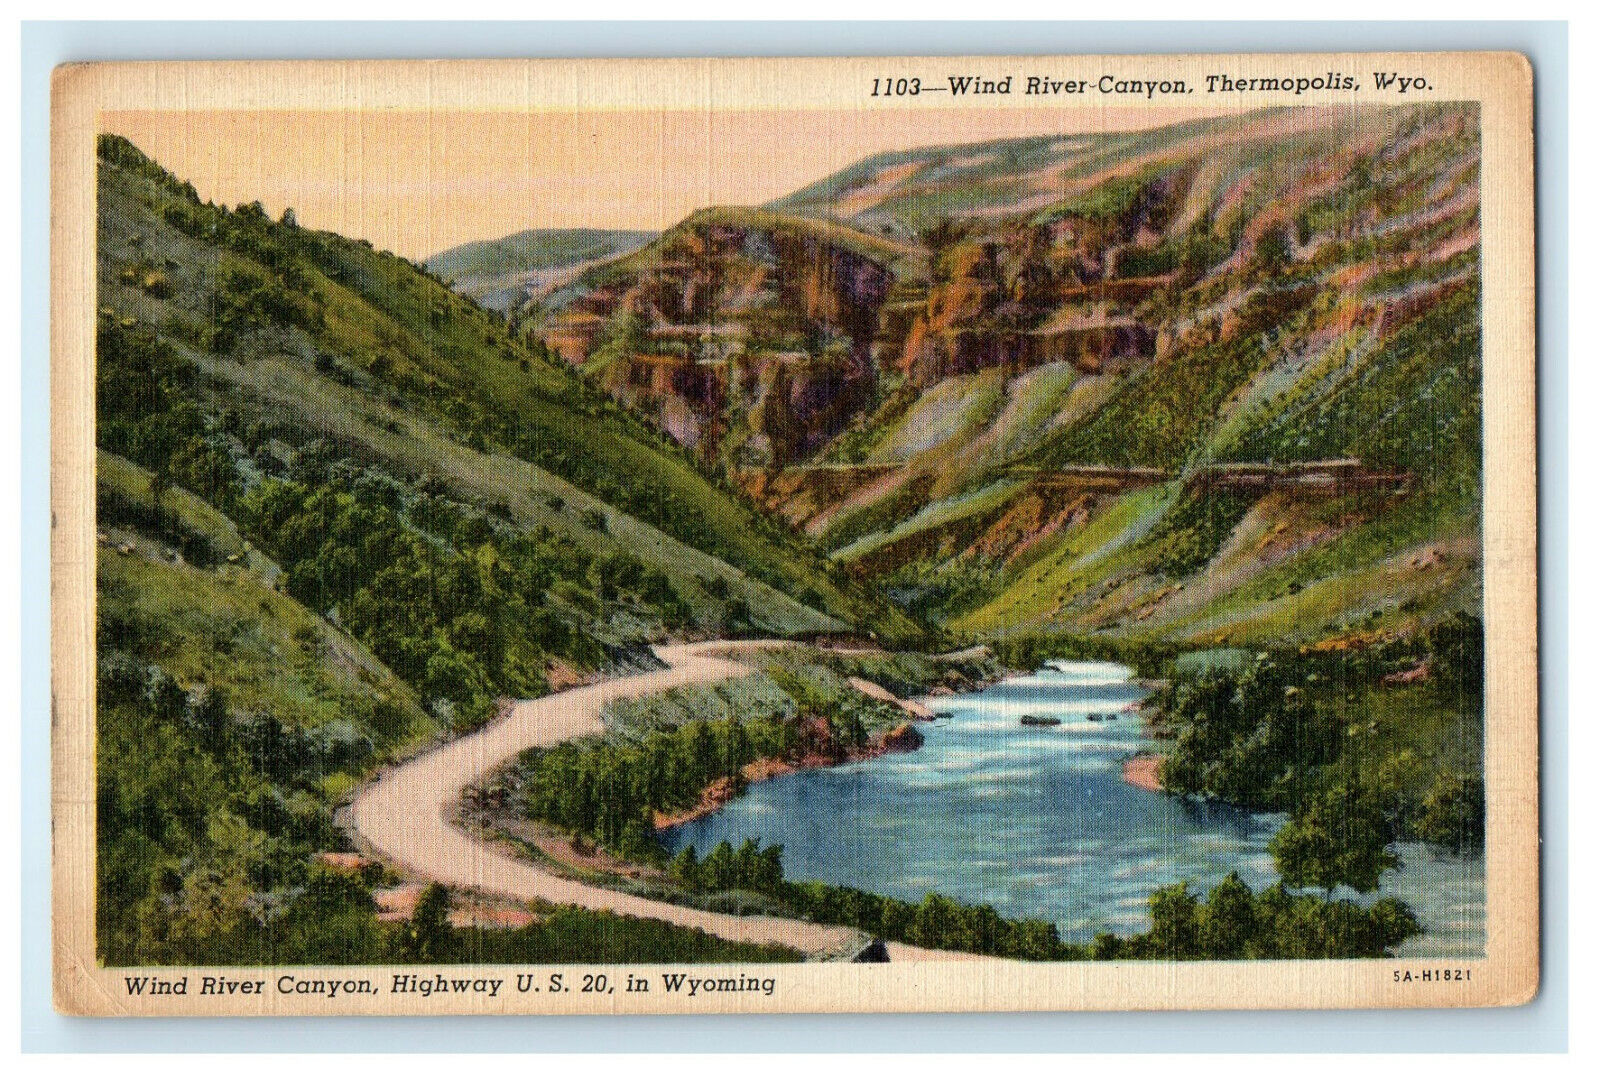 c1940s Wind River Canyon US Highway 20 Thermopolis, Wyoming WY Postcard